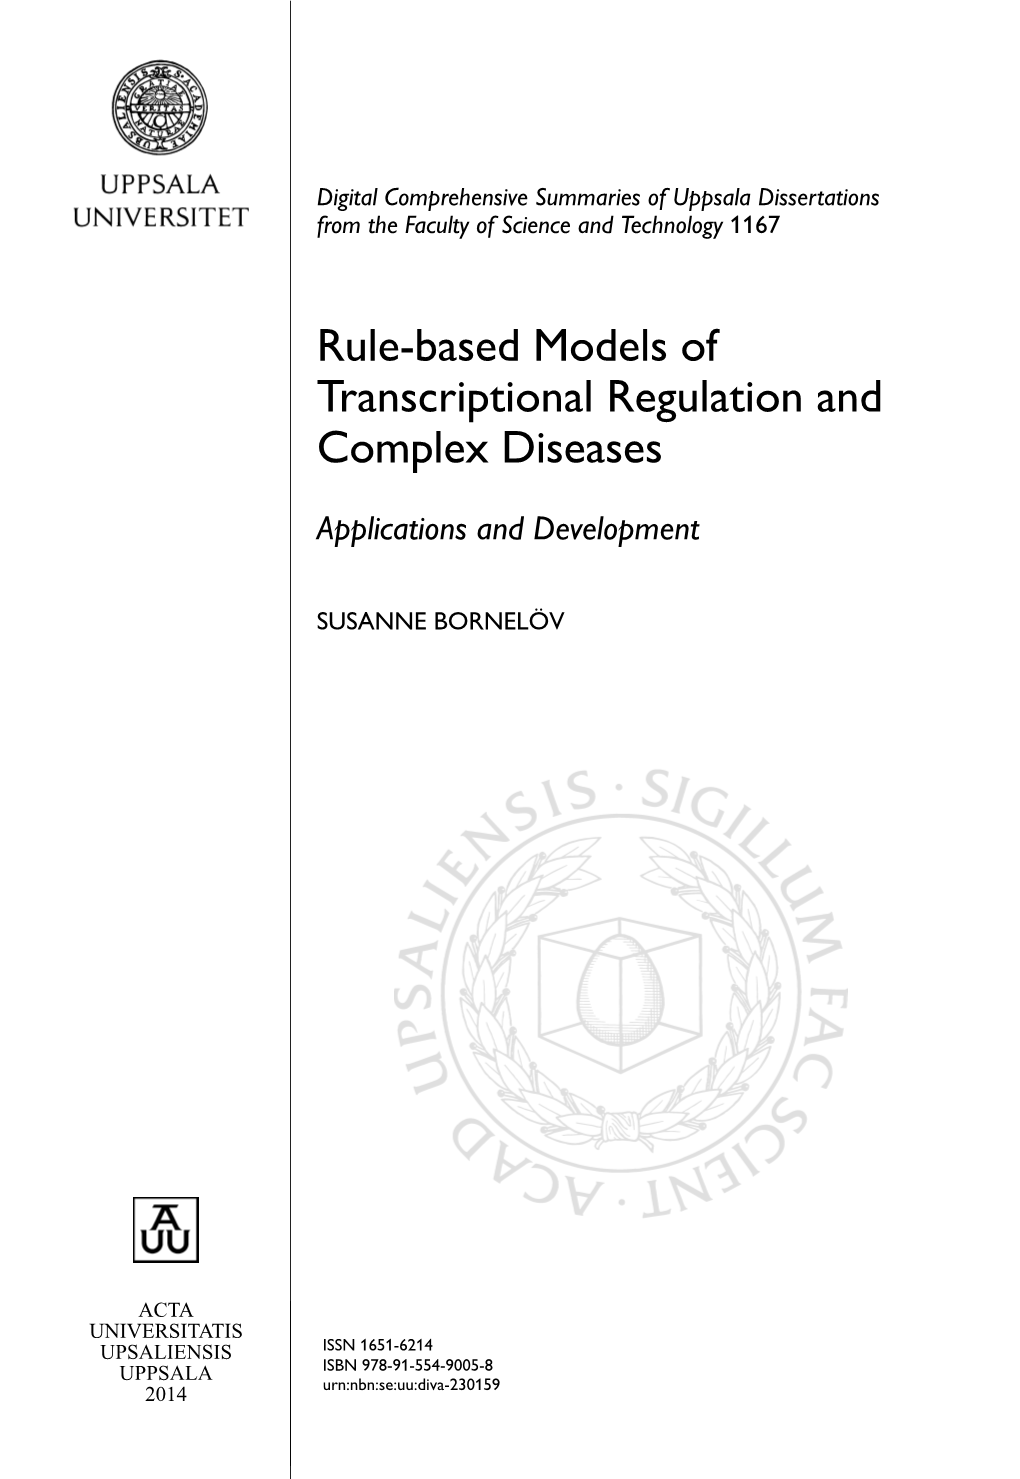 Rule-Based Models of Transcriptional Regulation and Complex Diseases